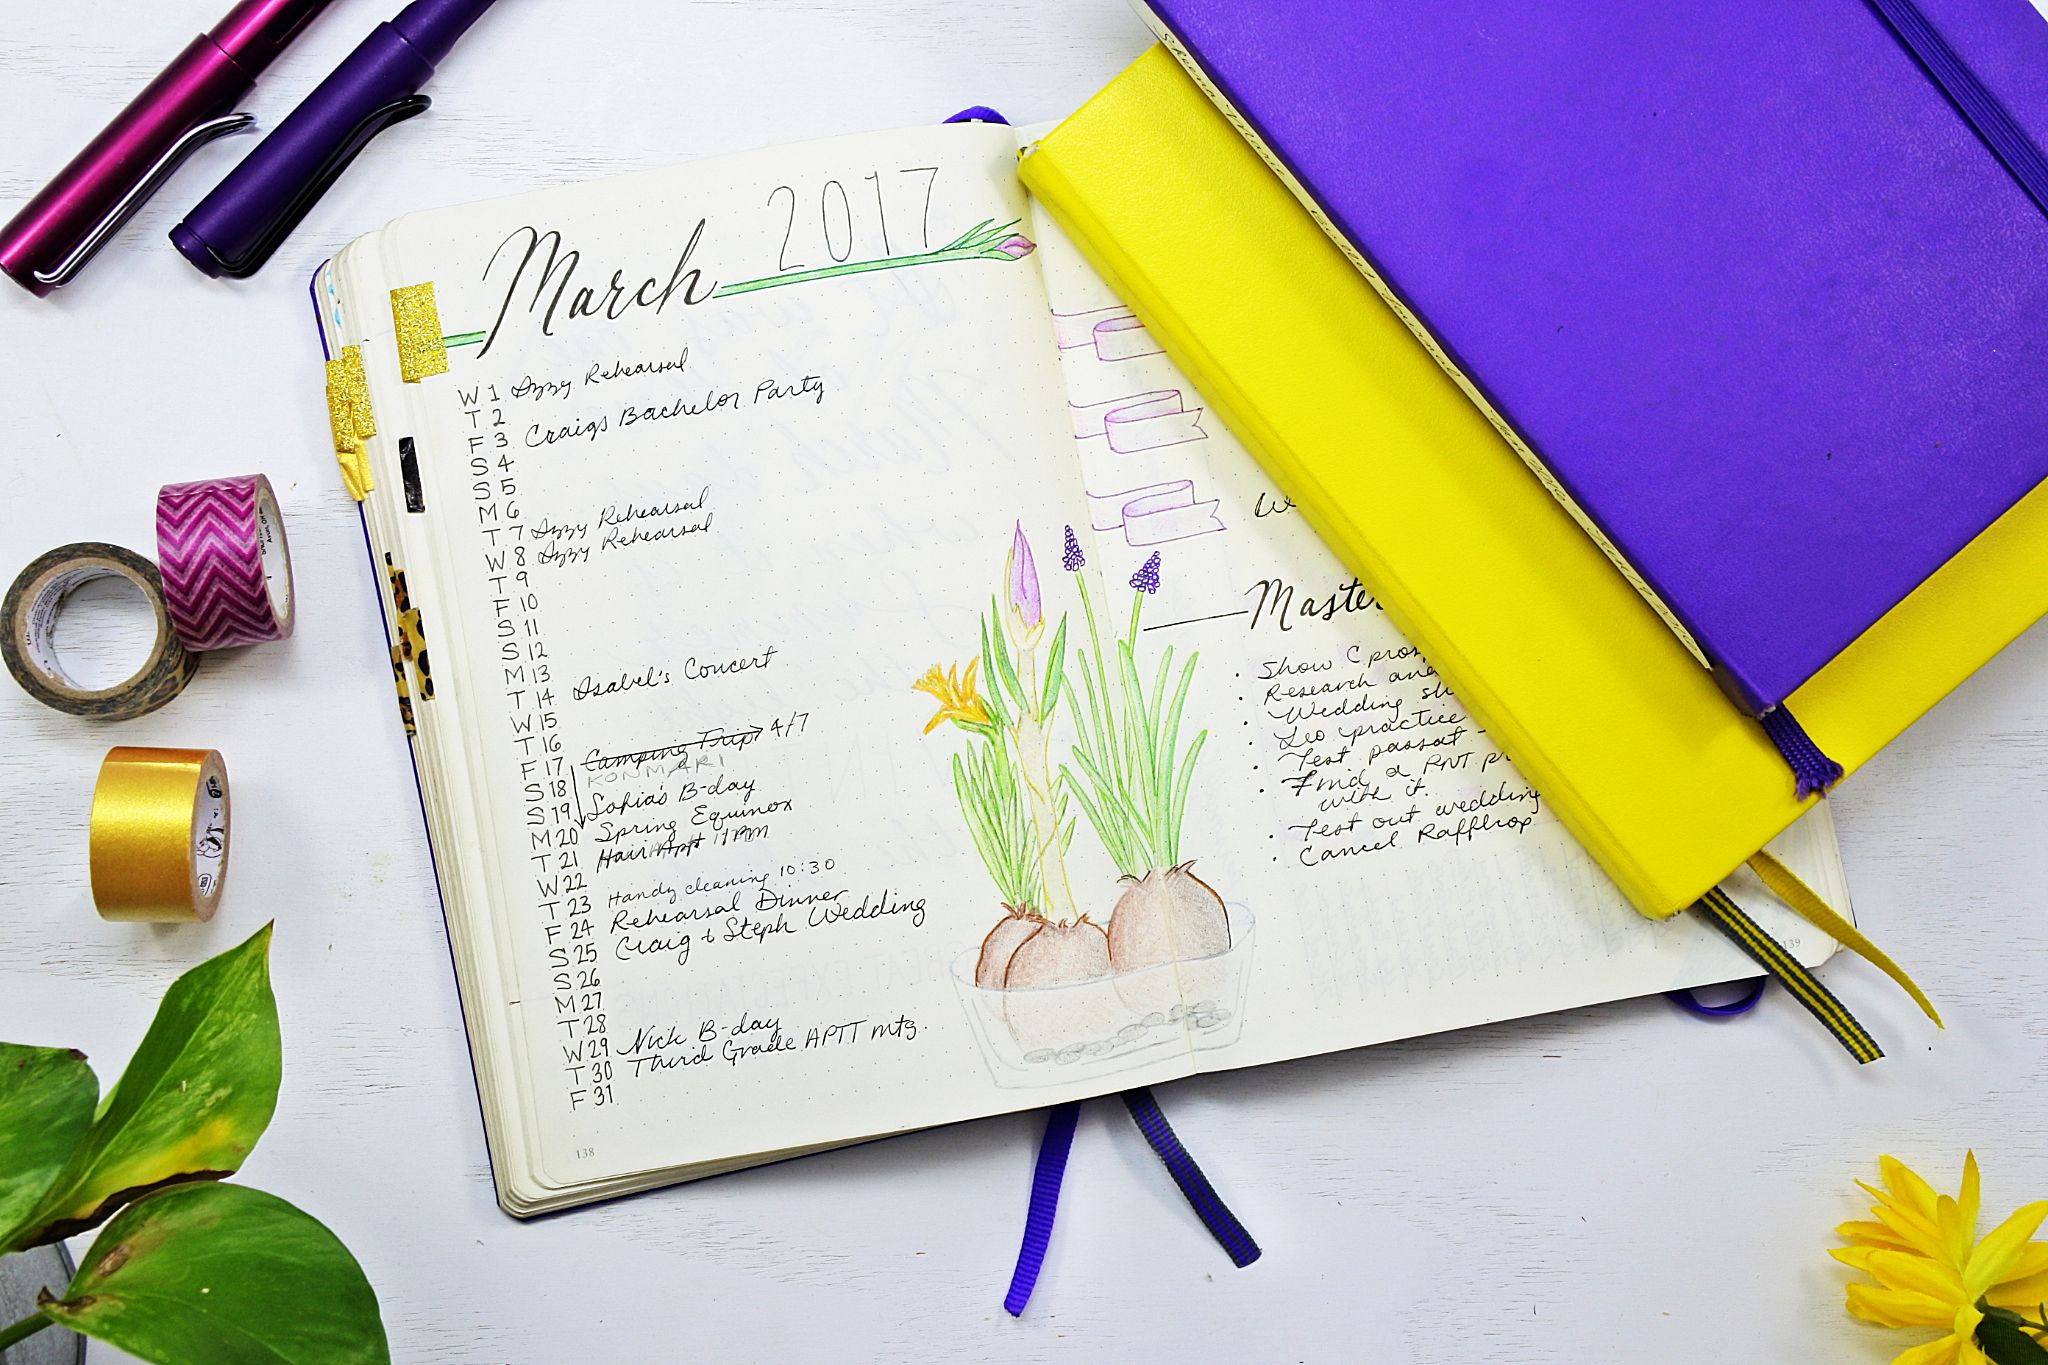 How To Use Your Bullet Journal For Some Serious Goal Planning - Type B  Planner